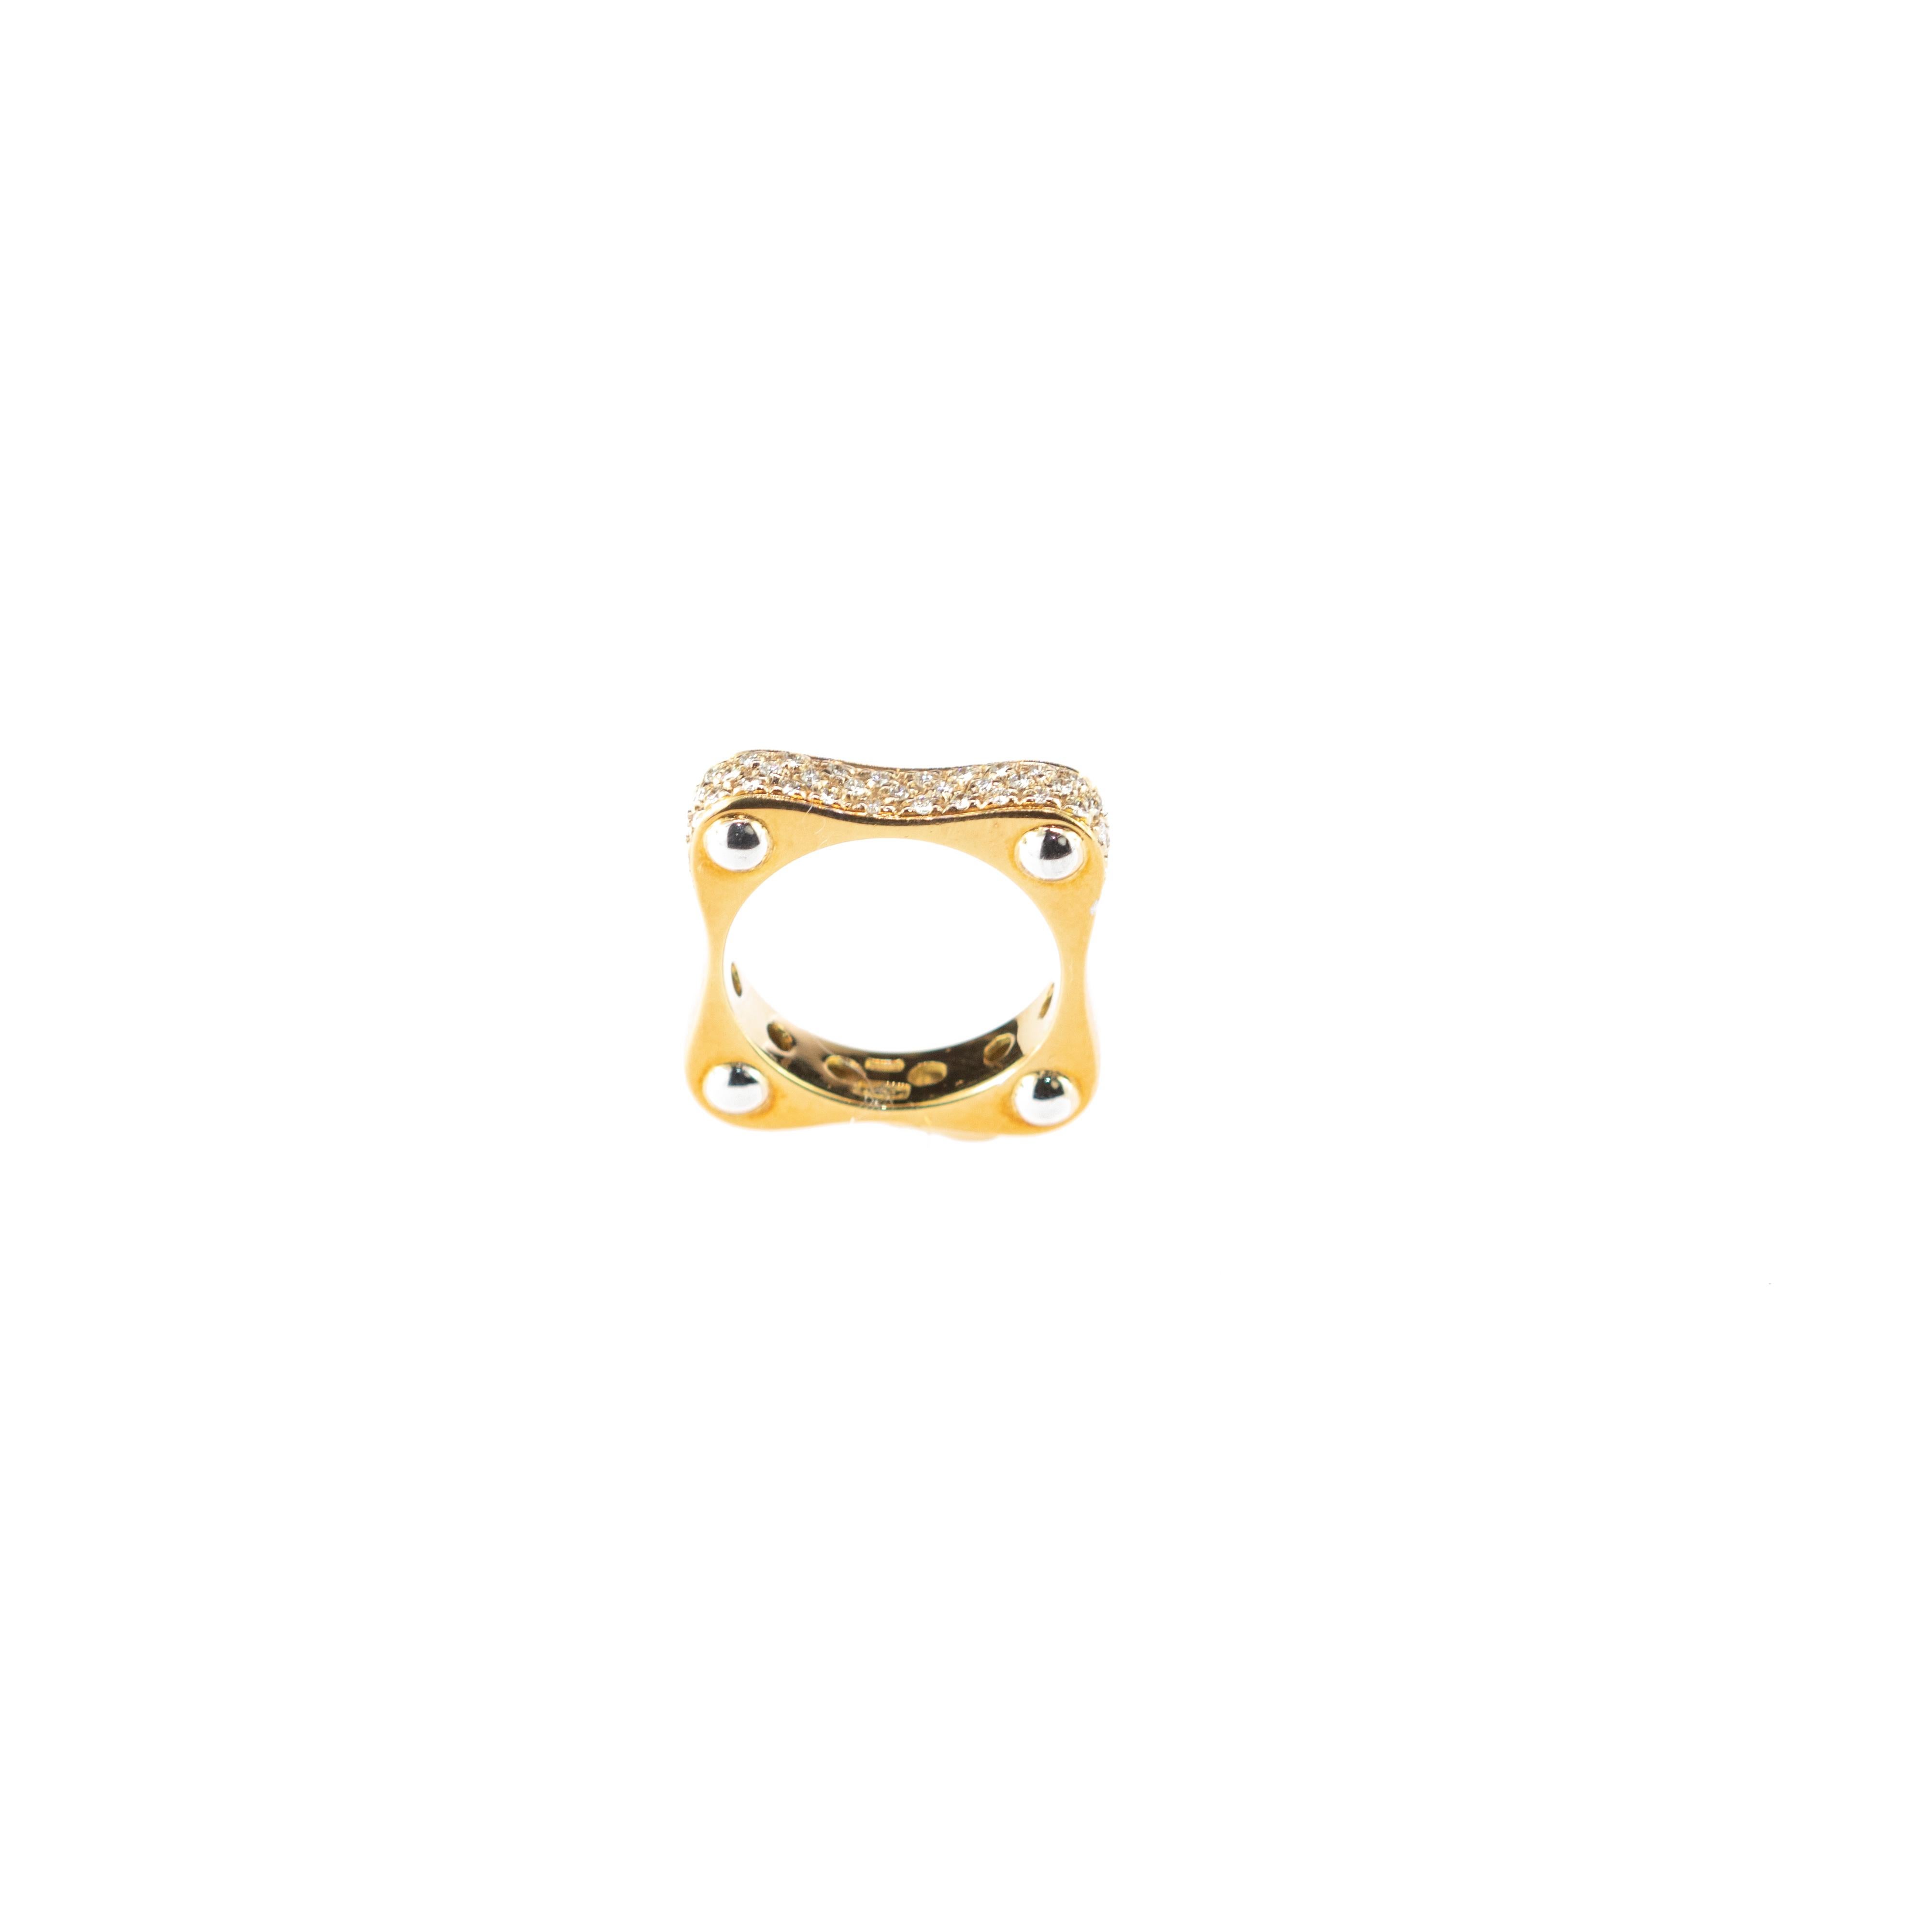 A piece of art only suitable for a risky person willing to break stereotypes.This unique and mysterious design is inspired by minimalism tendences. 

A 18 karat yellow gold ring that offers on its upper part a set of diamonds that faithfully perch